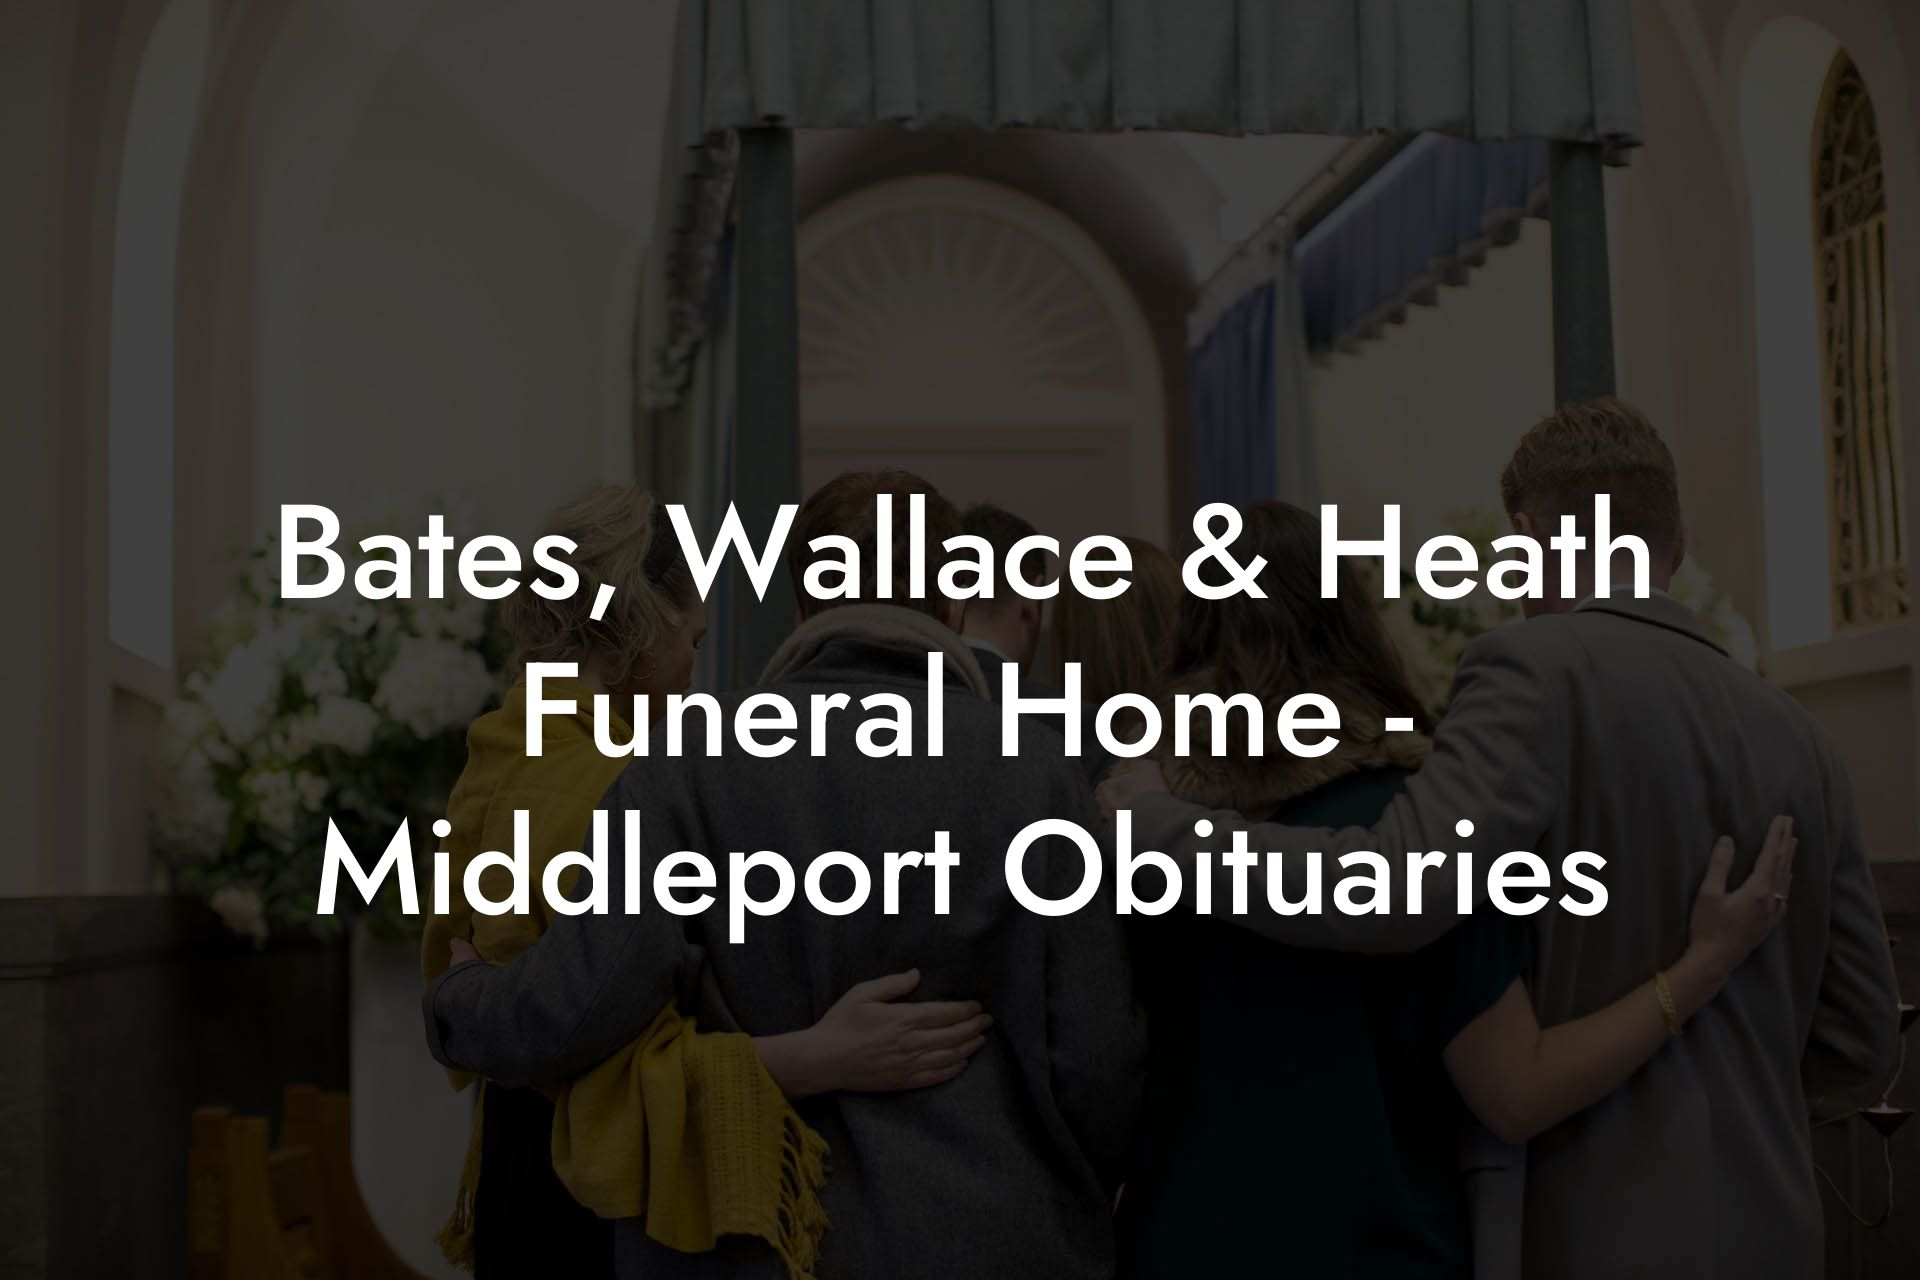 Bates, Wallace & Heath Funeral Home - Middleport Obituaries